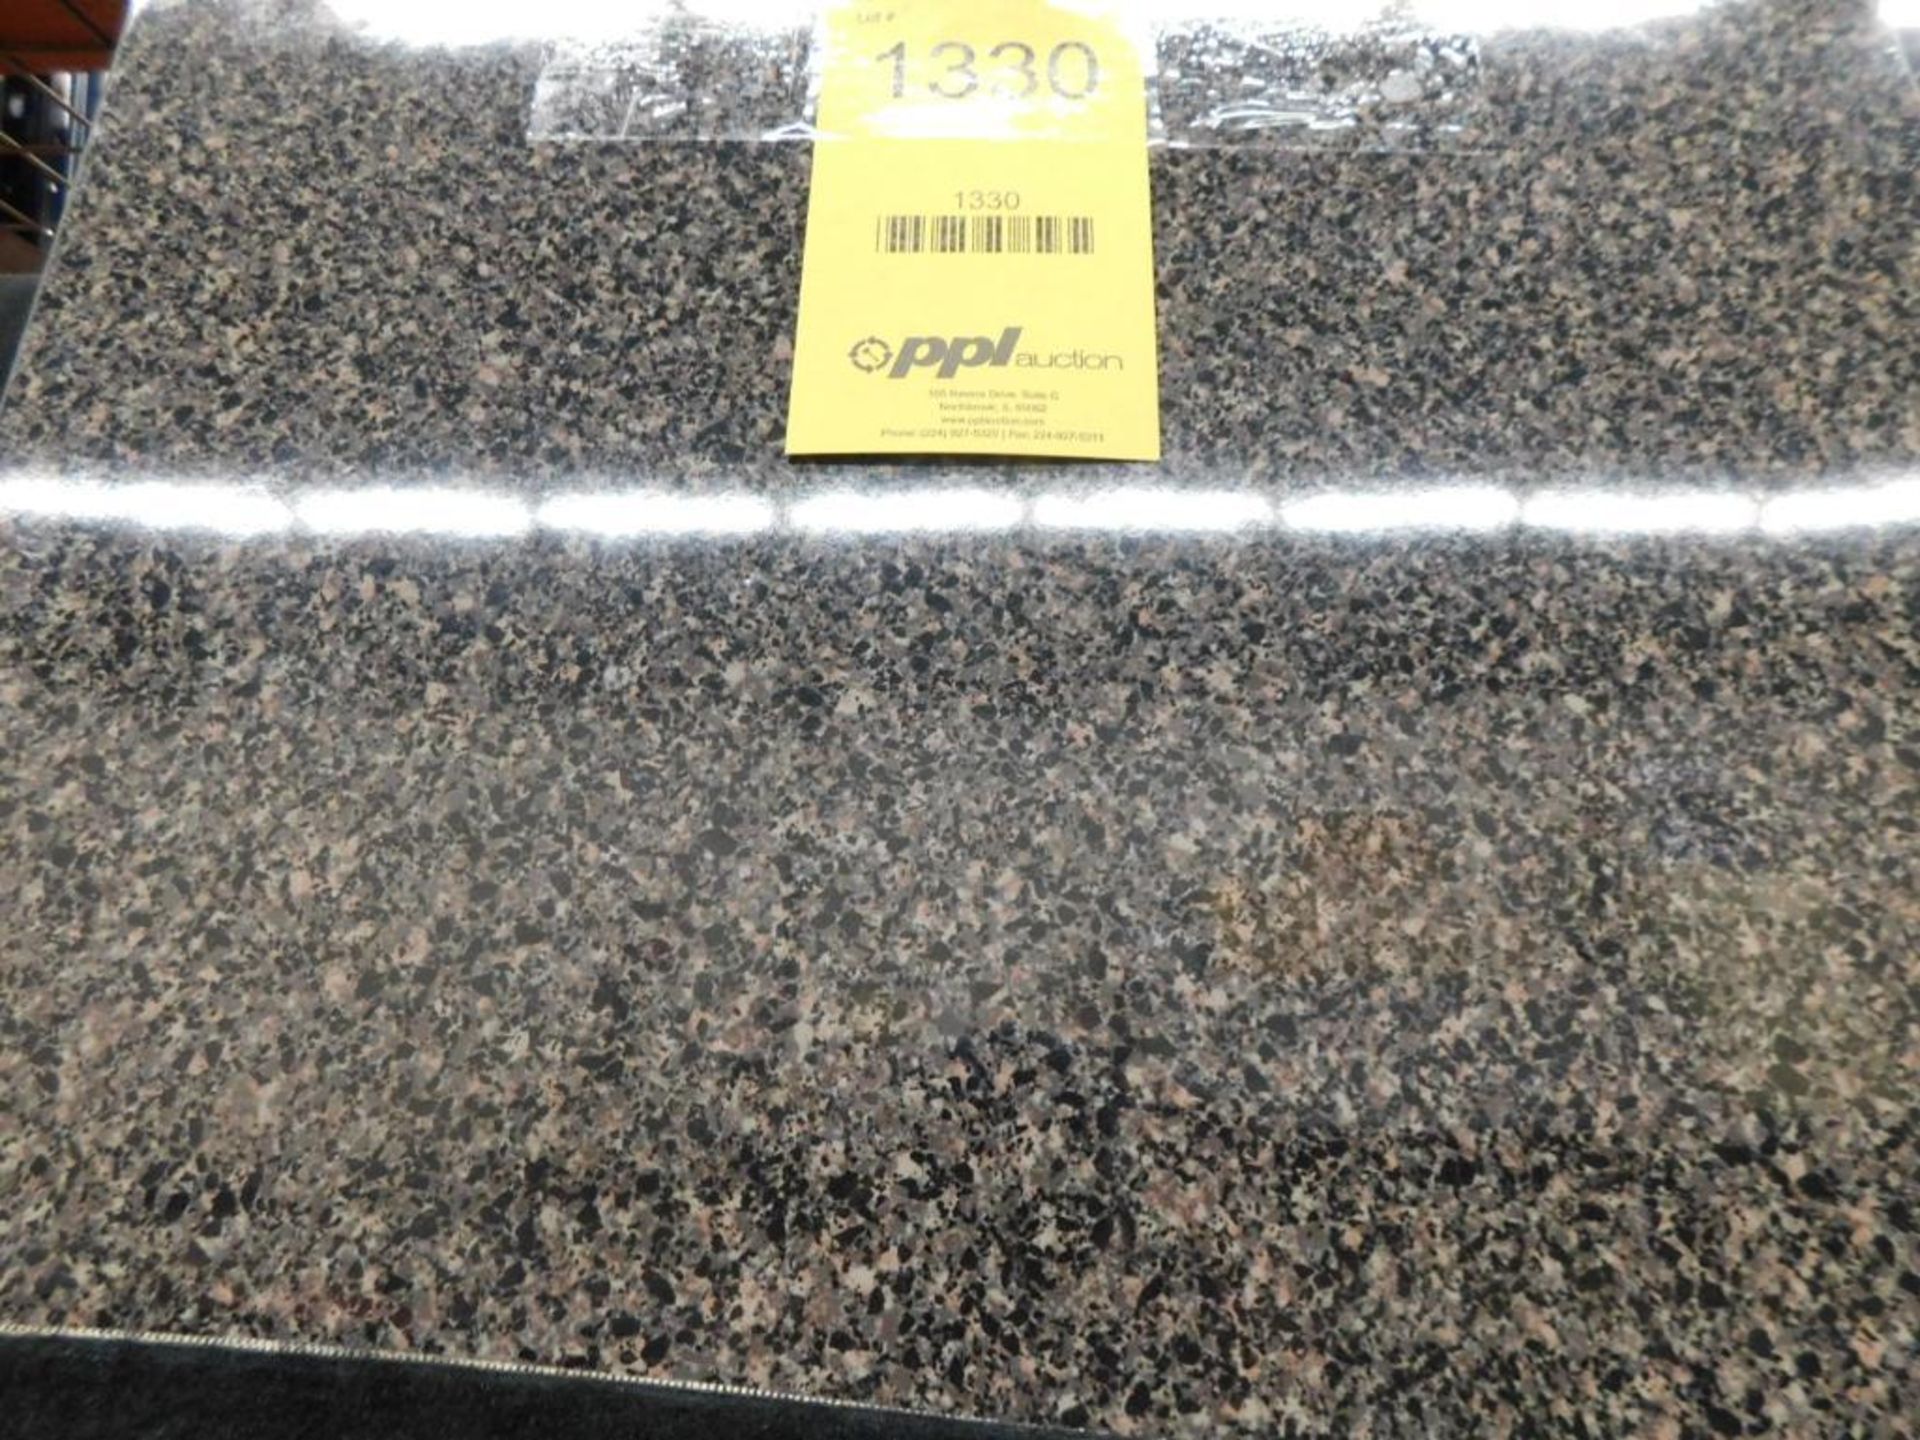 6' x 24" Granite Bar (Image For Reference Only, Actual Item May Look Different) (LOCATION: 1766 - Image 3 of 3